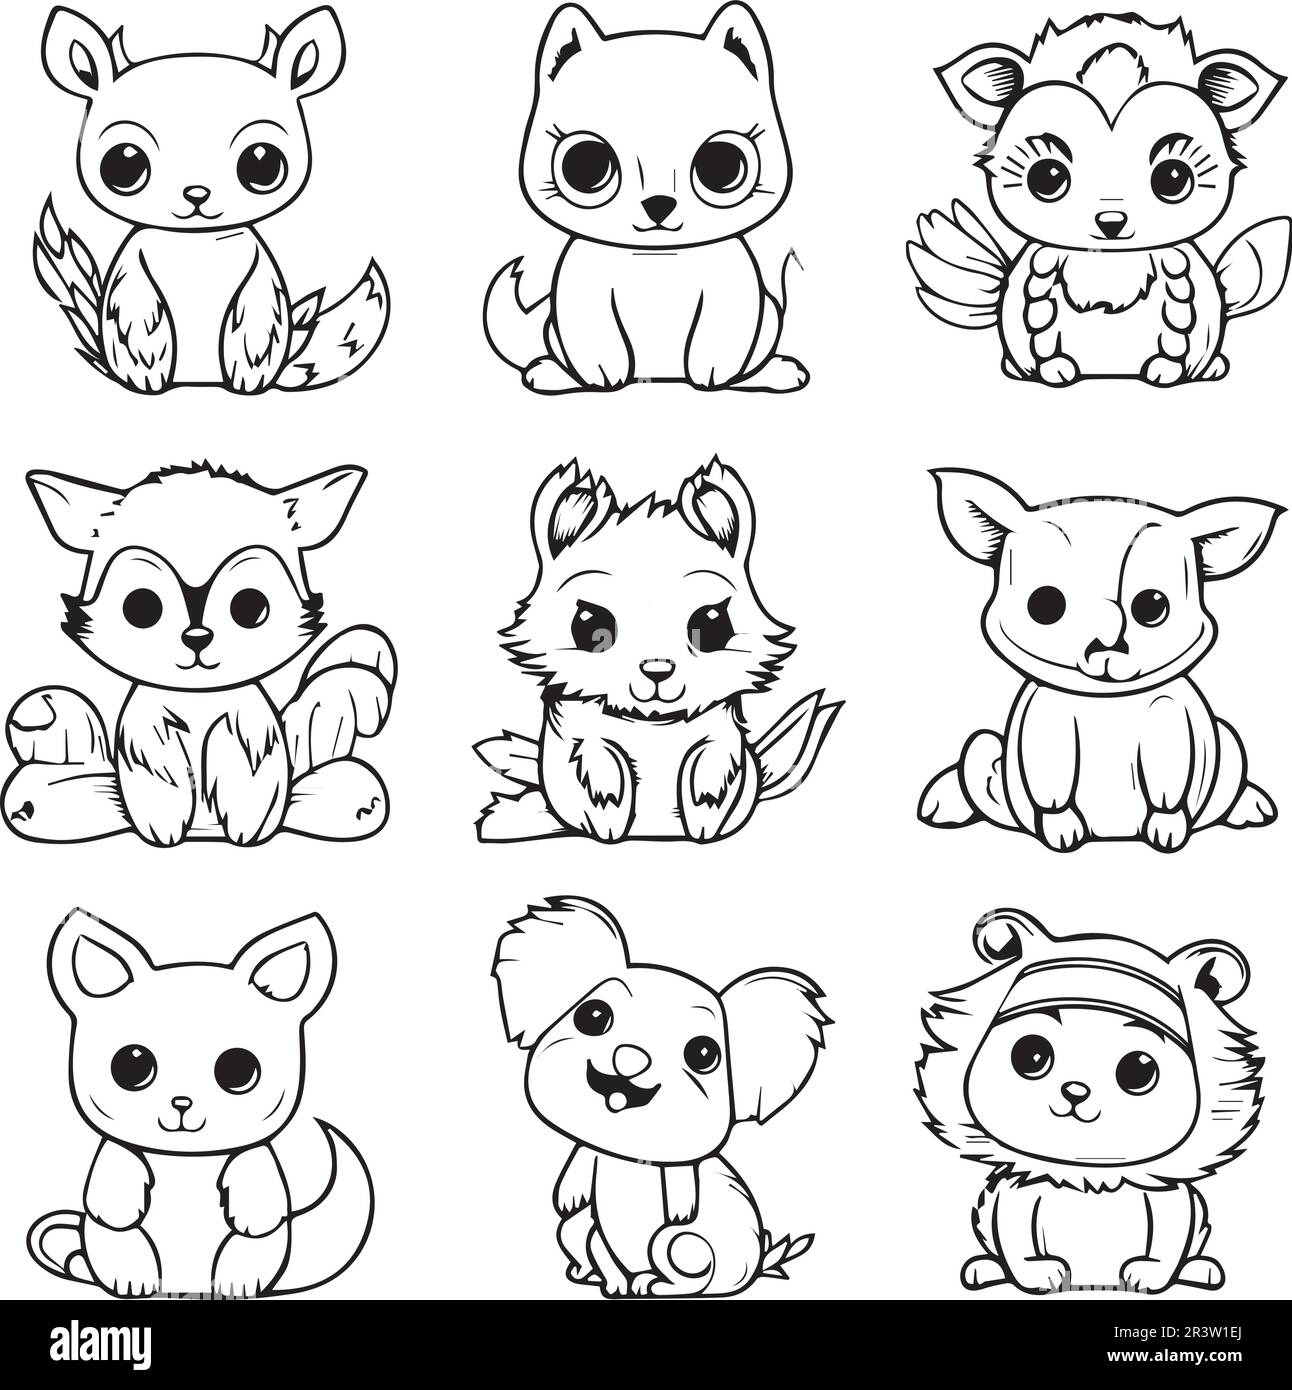 A set of cute animal line art coloring book pages for kids. Stock Vector